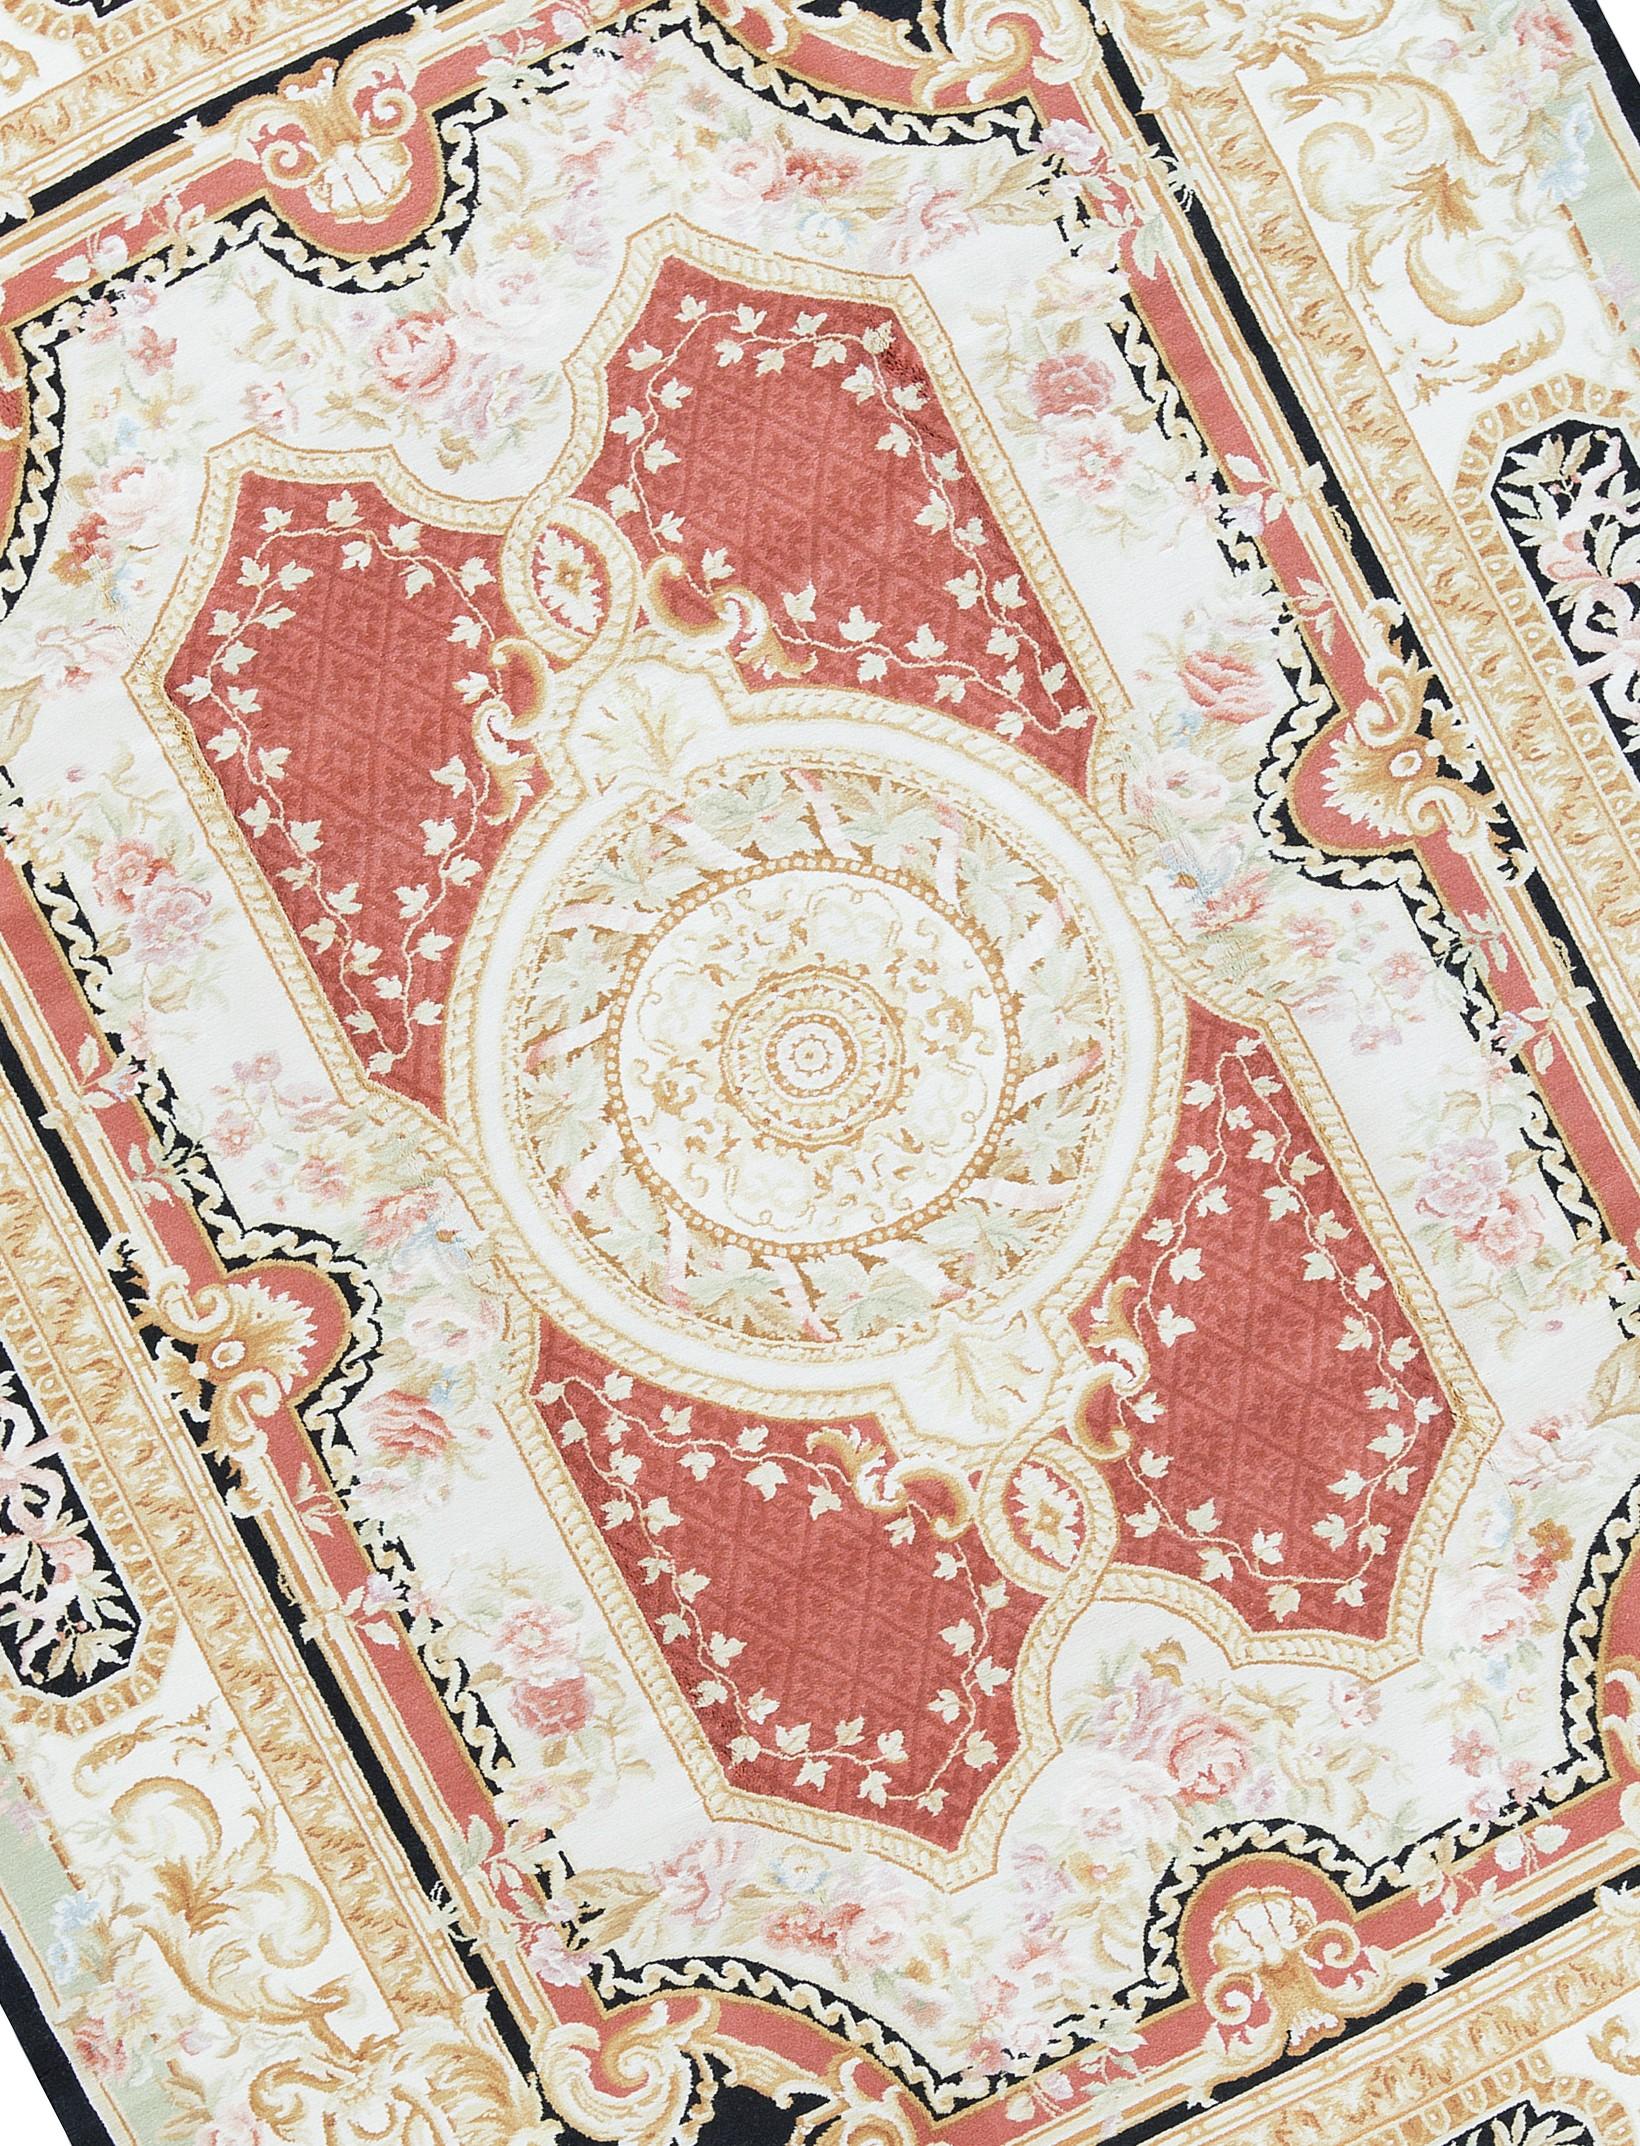 Handwoven Recreation of the Classic French flat-weave Aubusson rugs that have been found in the finest homes and palaces since the late 17th century. Size: 9' 11'' x 12'.